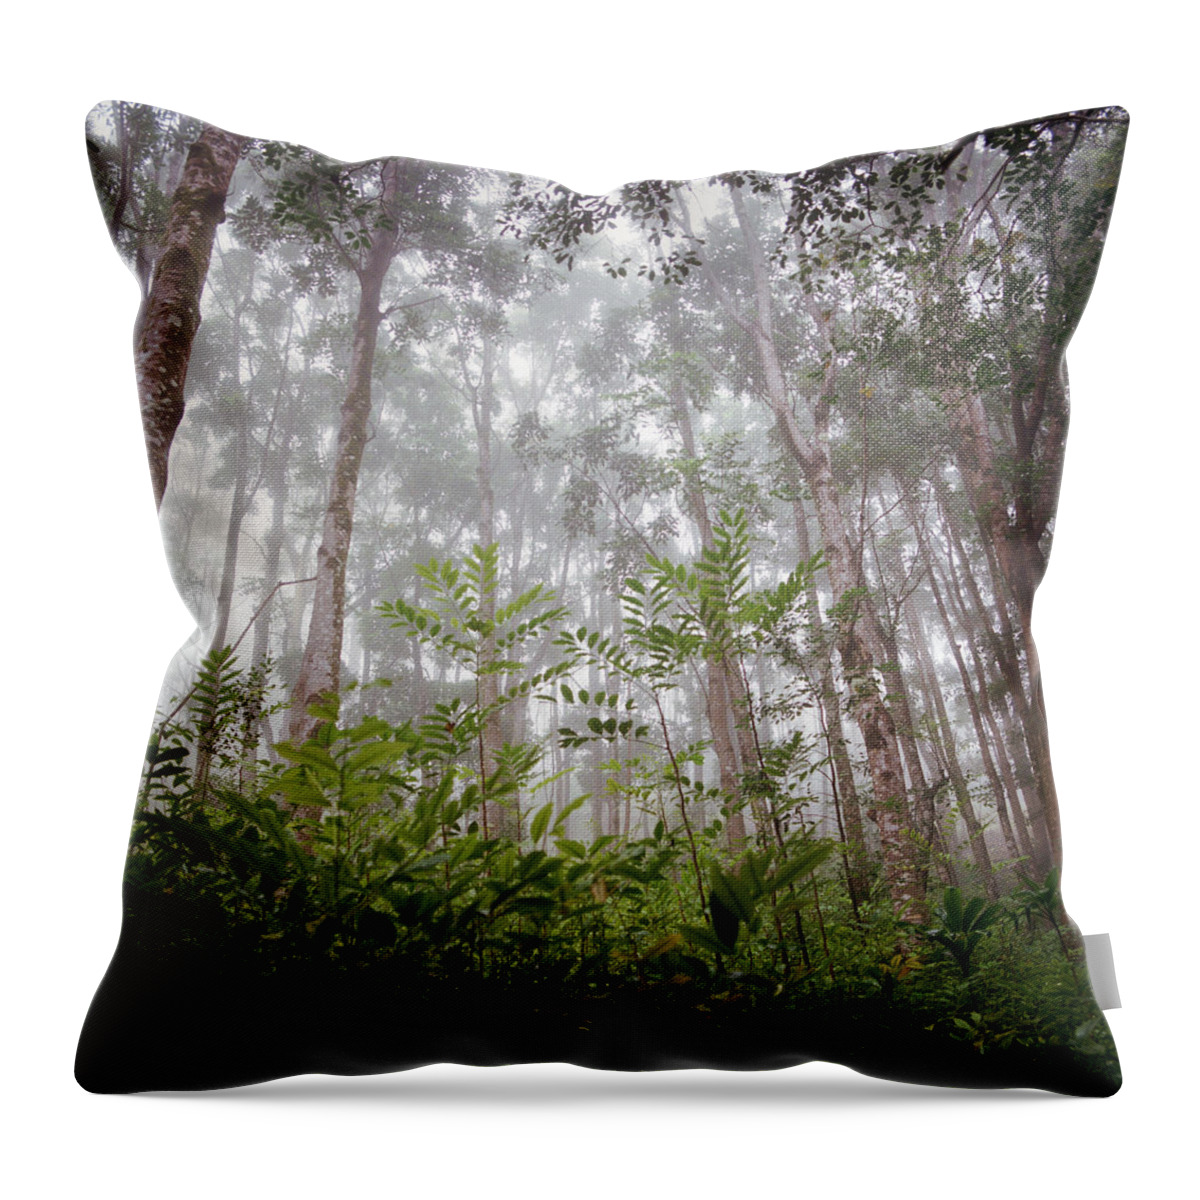 Outdoors Throw Pillow featuring the photograph Foggy Tropical Forest by Danielle D. Hughson